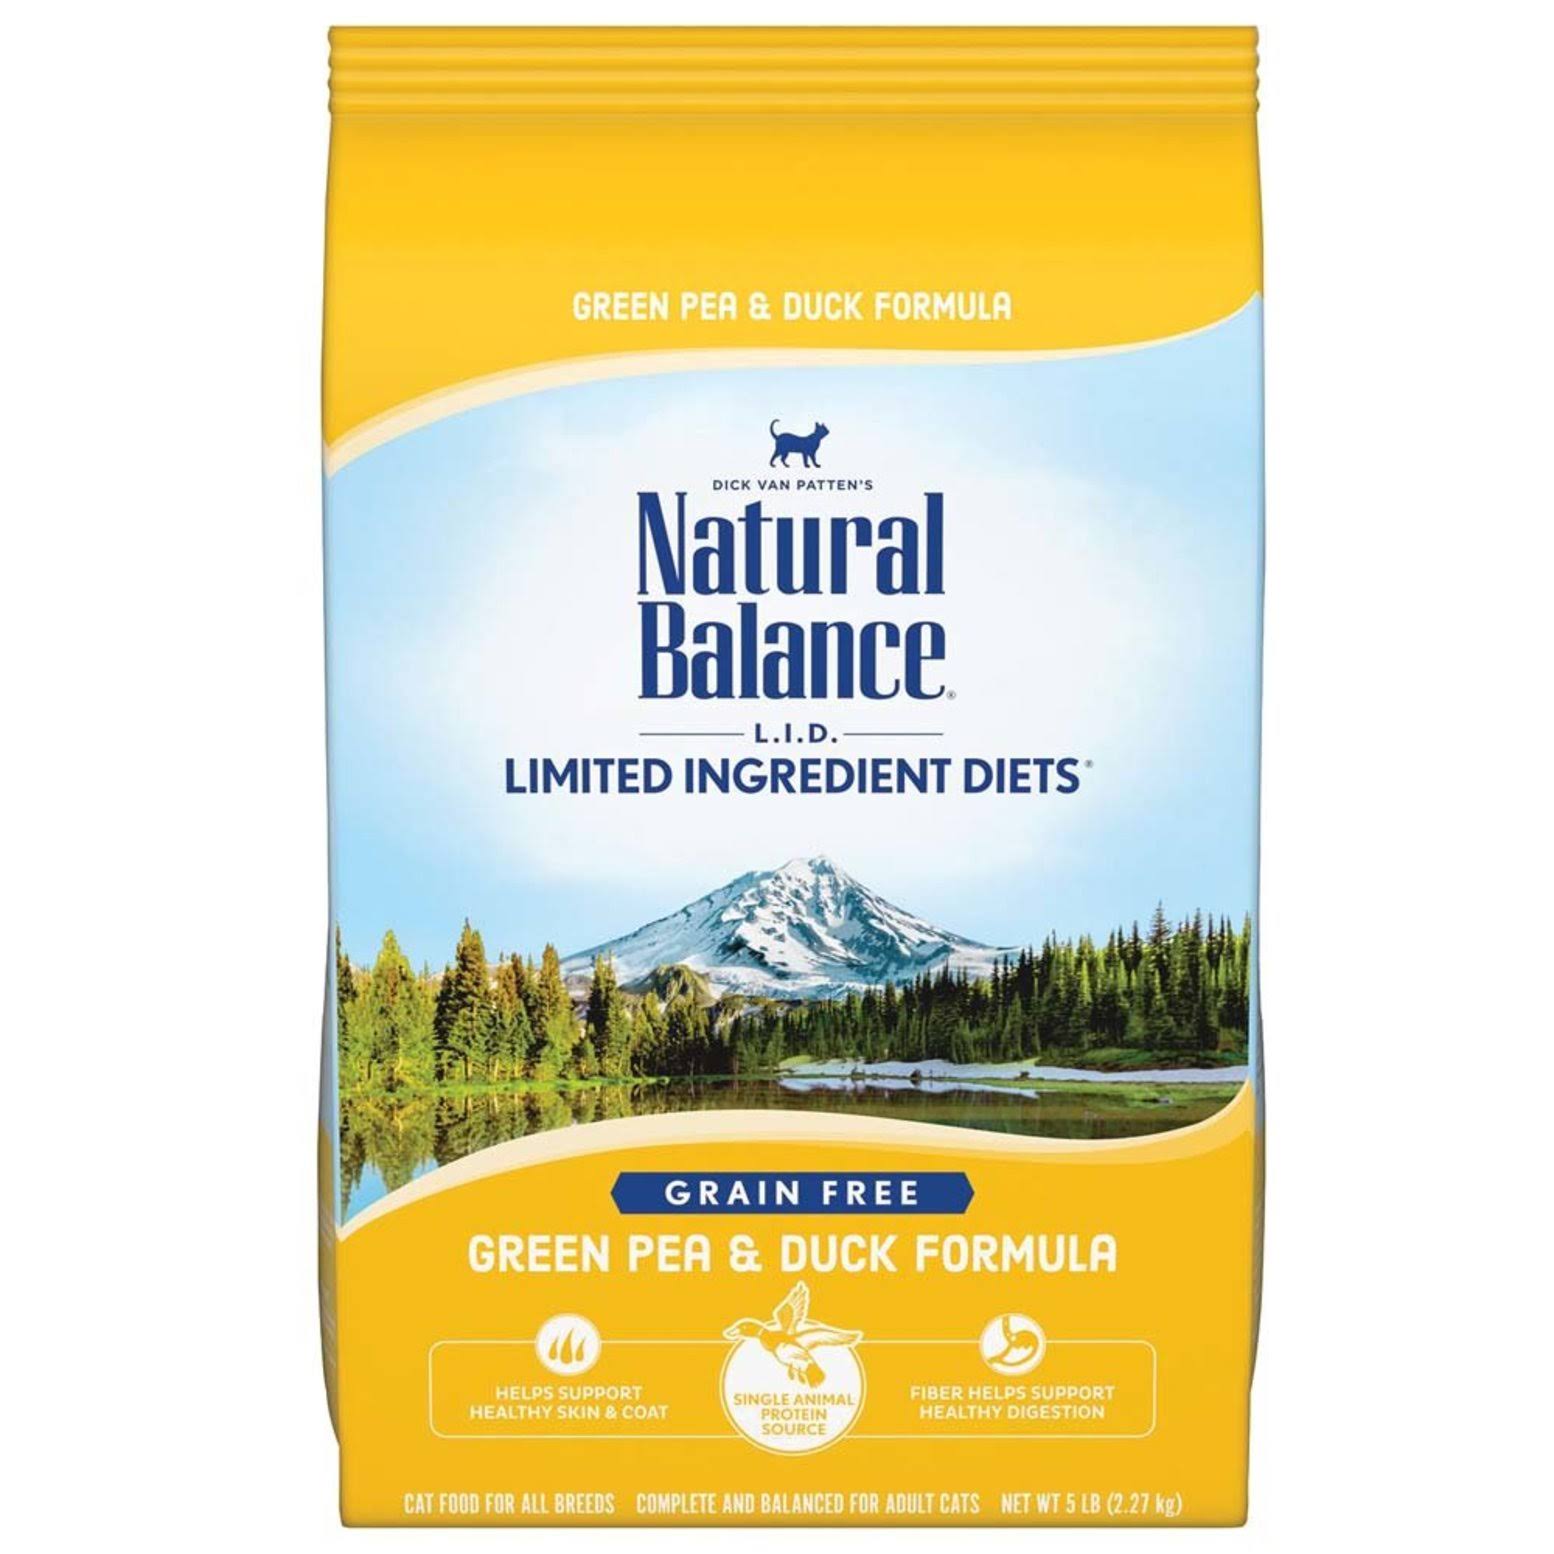 Natural Balance Cat Food - Green Pea and Duck